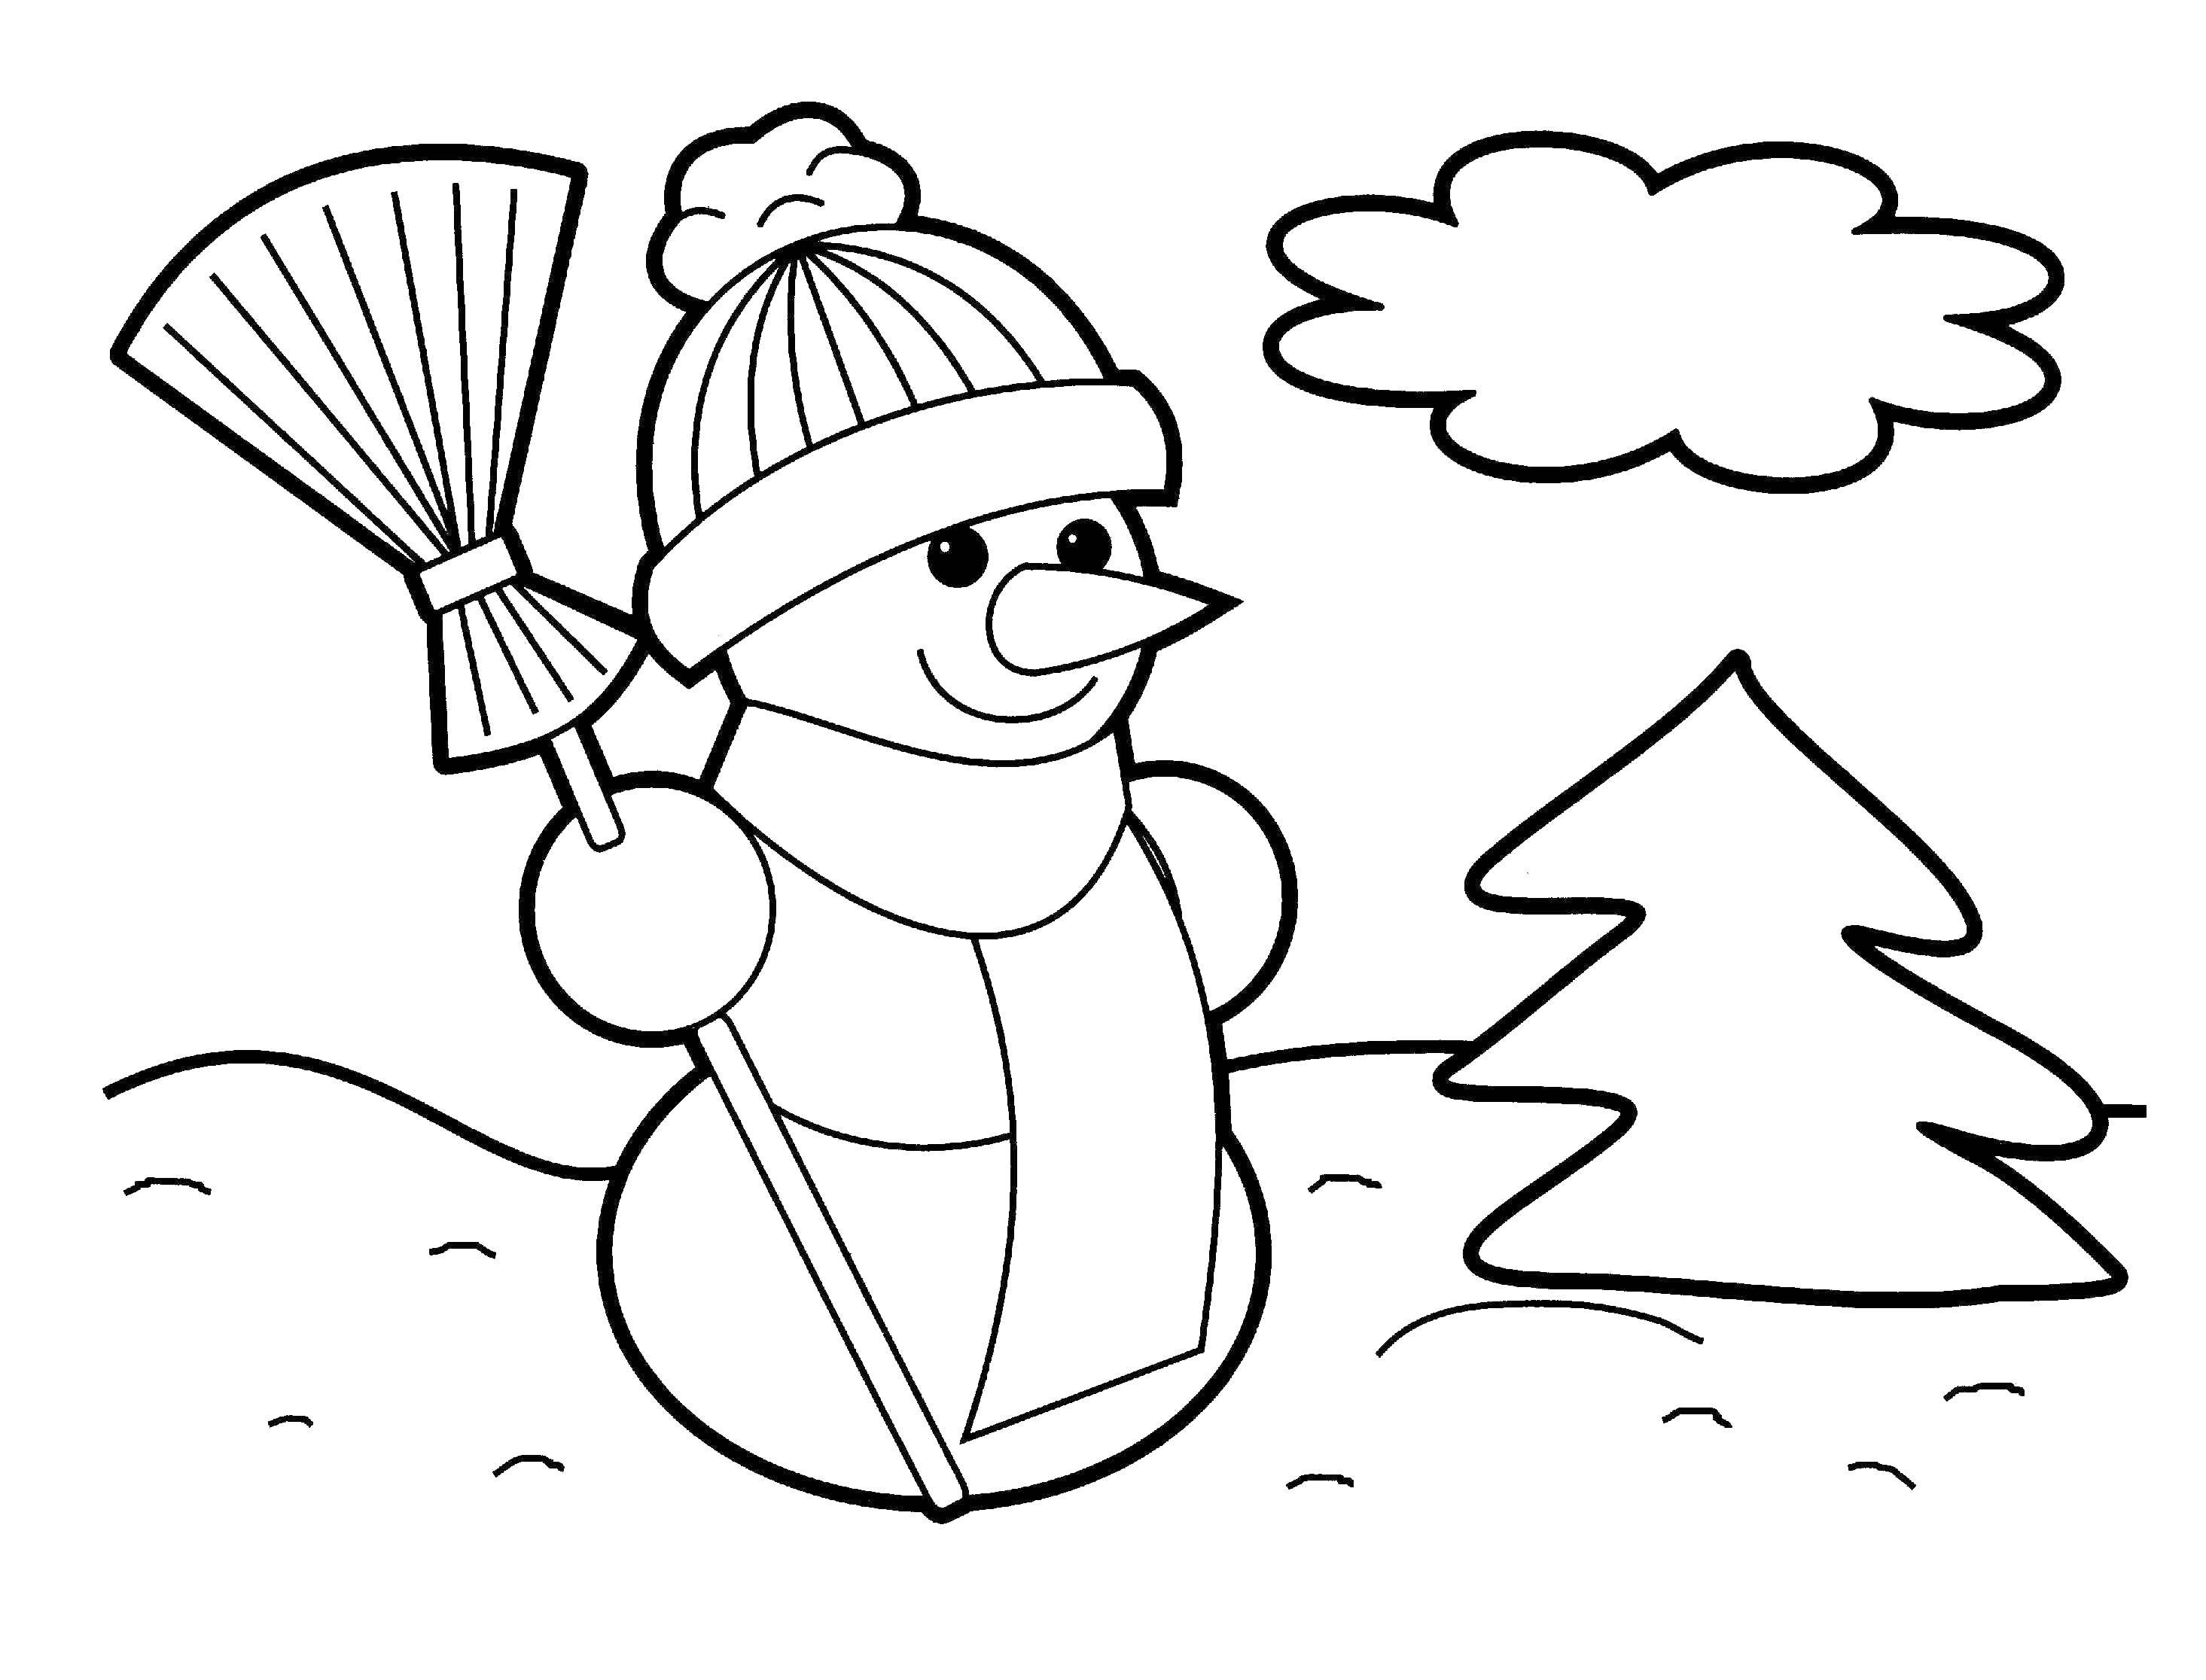 Coloring Snowman and Christmas tree. Category winter. Tags:  snowman, hat, broom, tree.